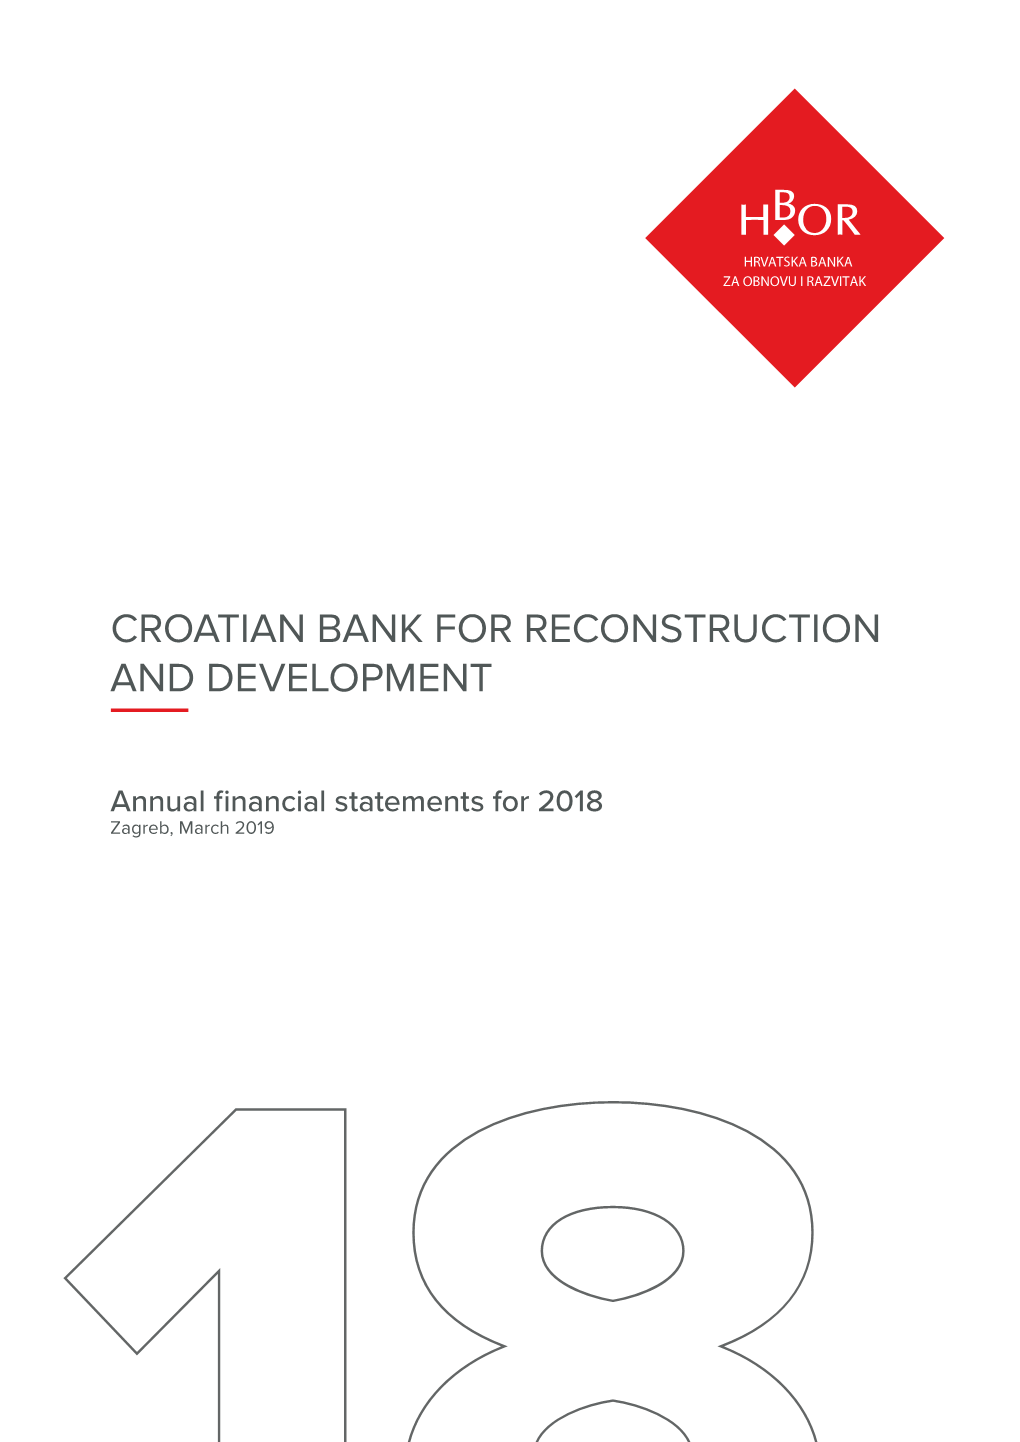 Croatian Bank for Reconstruction and Development